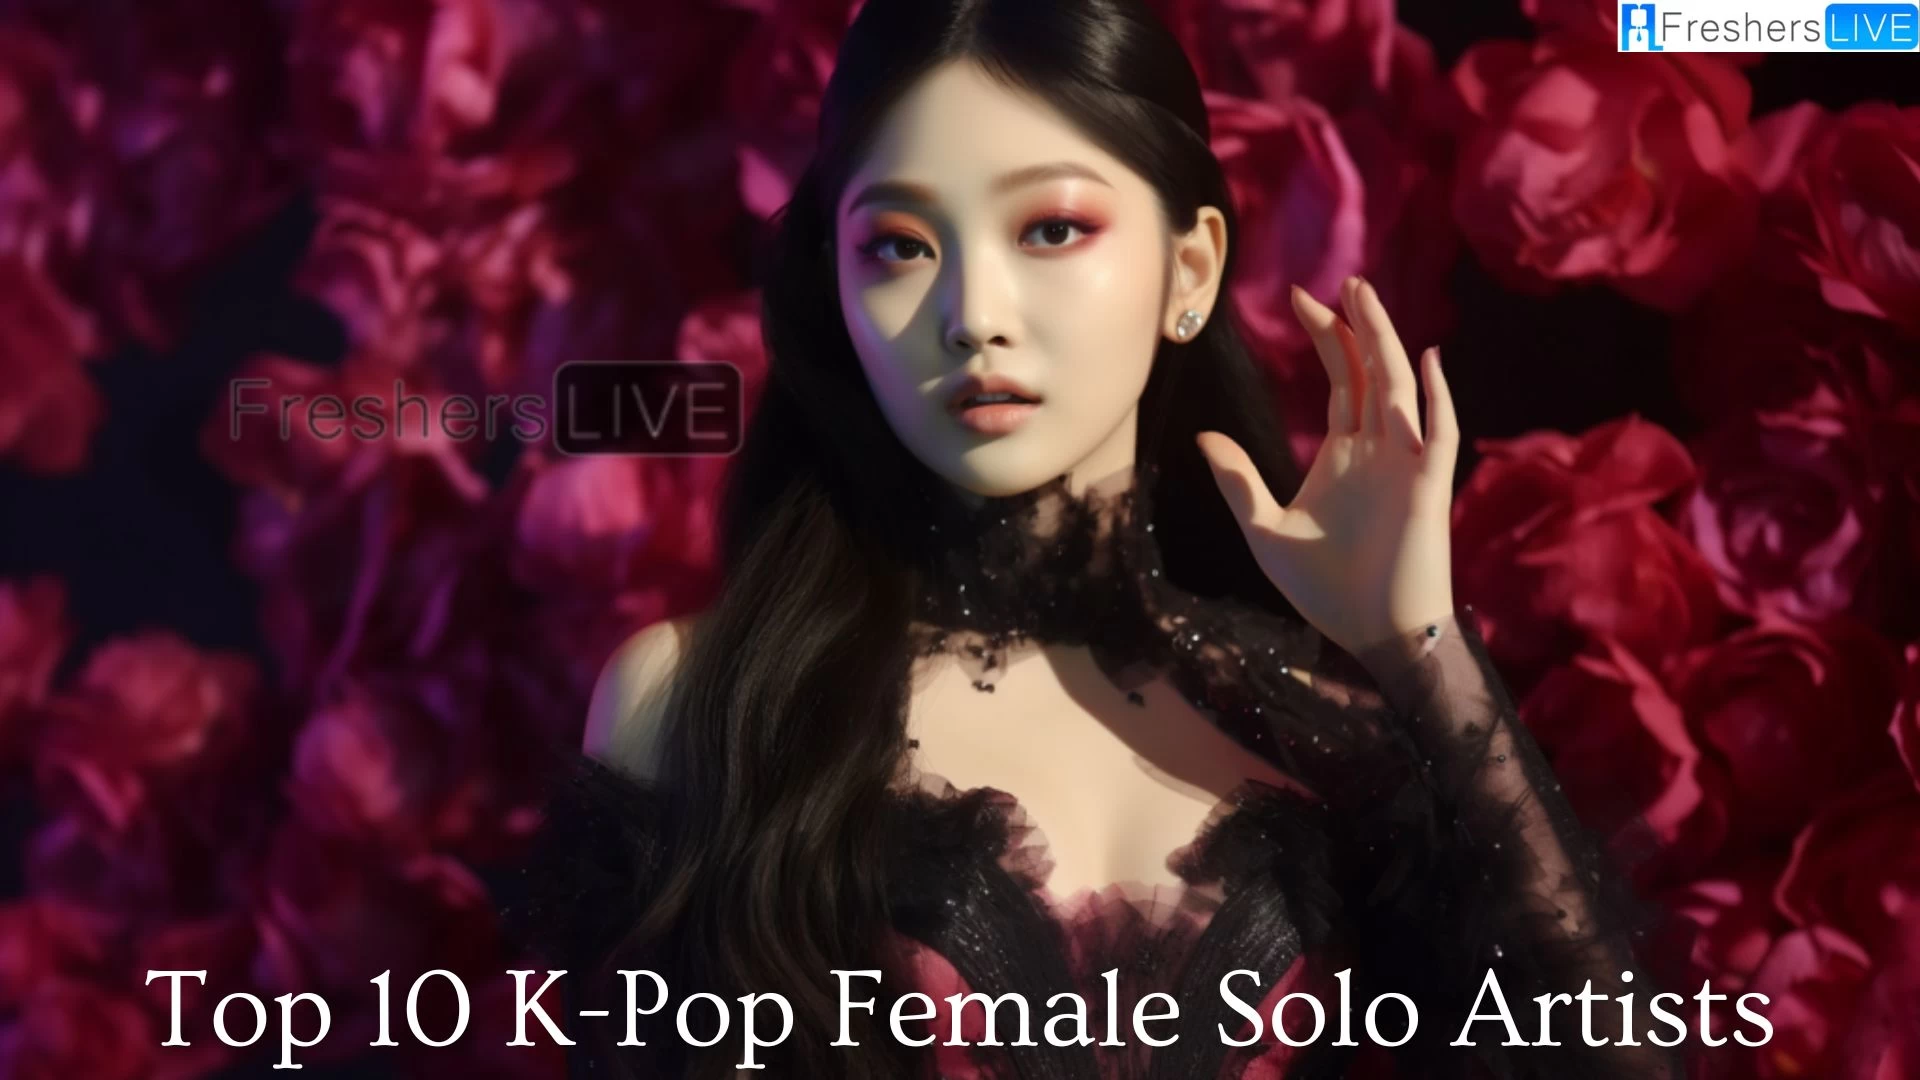 Top 10 K-Pop Female Solo Artists - A Showcase of Excellence